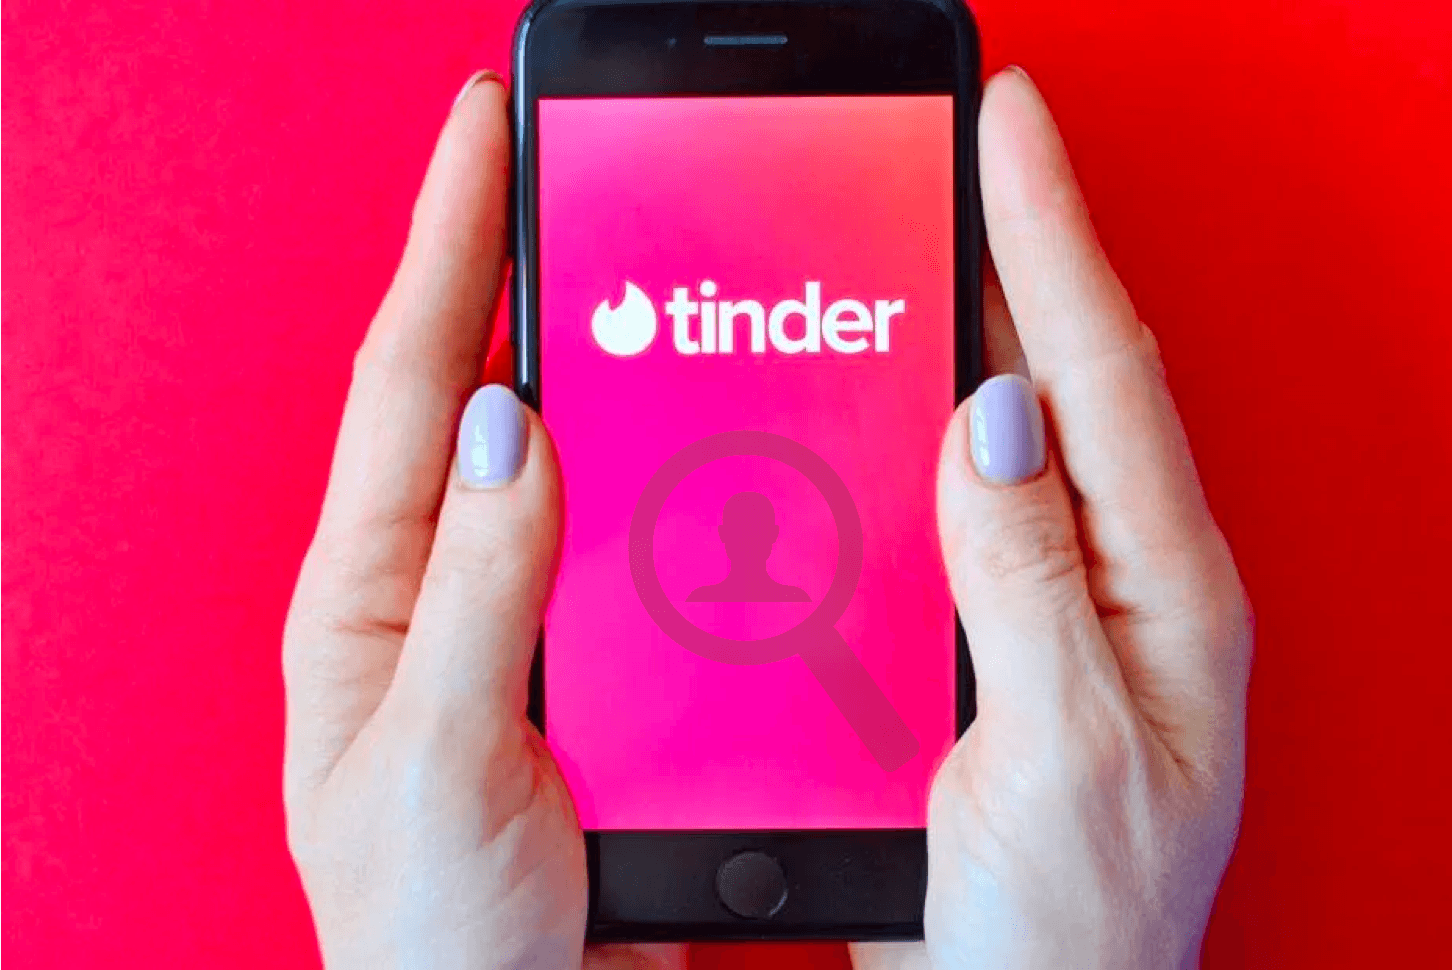 Tinder Match Background Check | 5 Ways to Check the Past of an Online Date